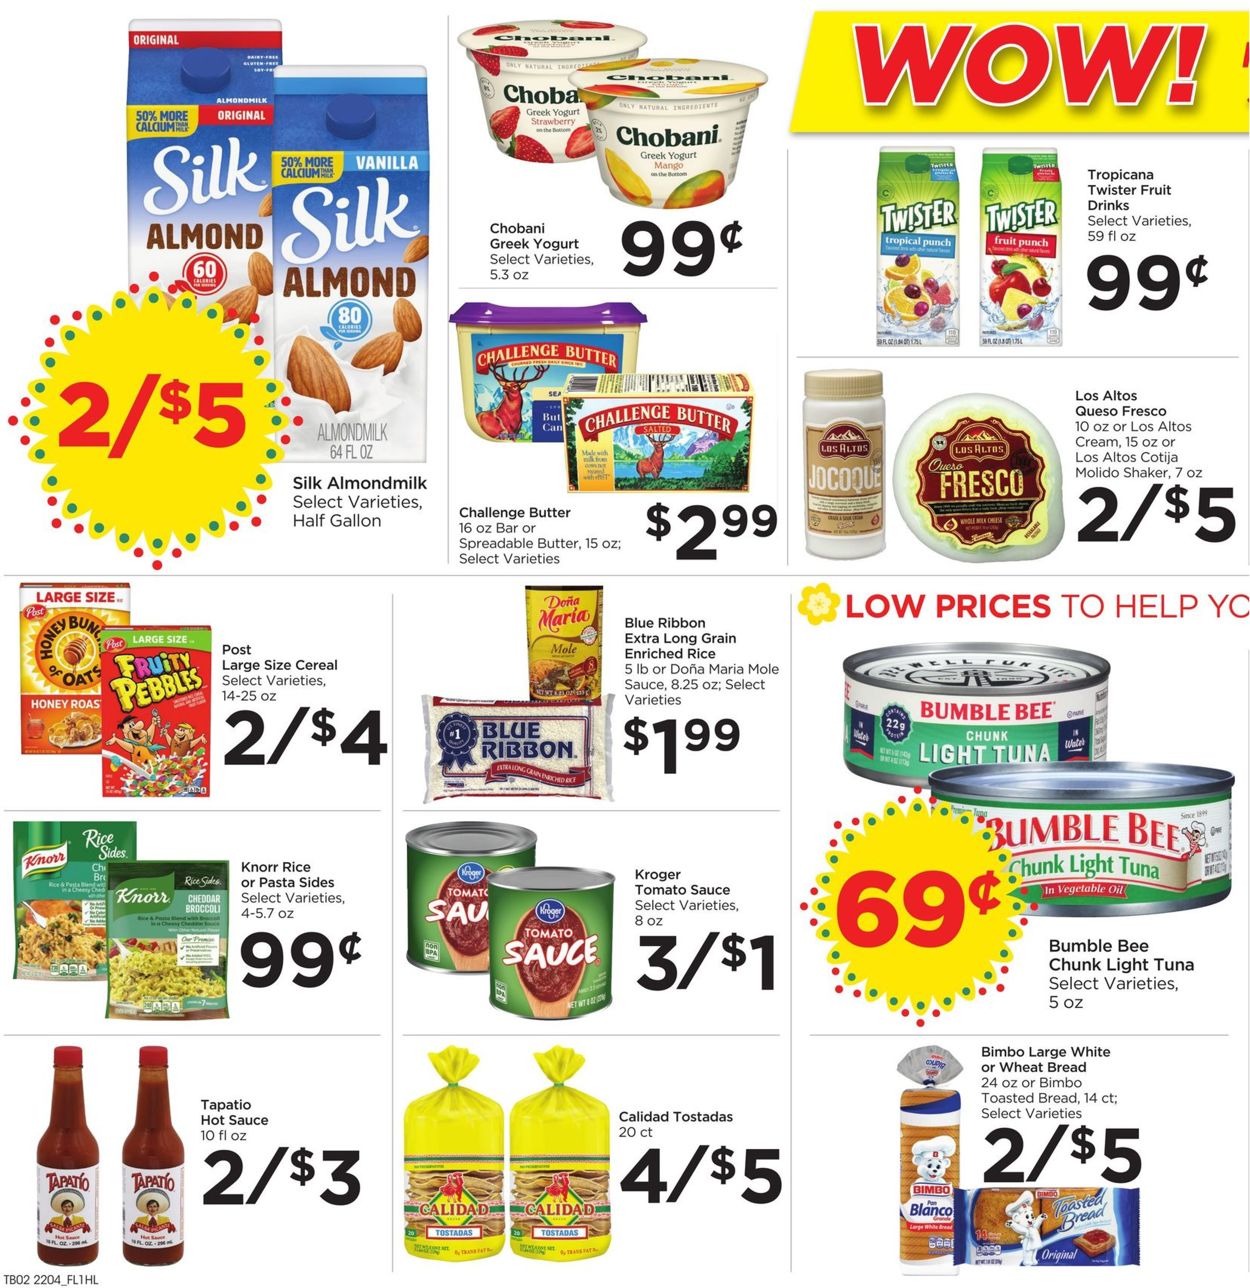 Catalogue Food 4 Less from 02/23/2022